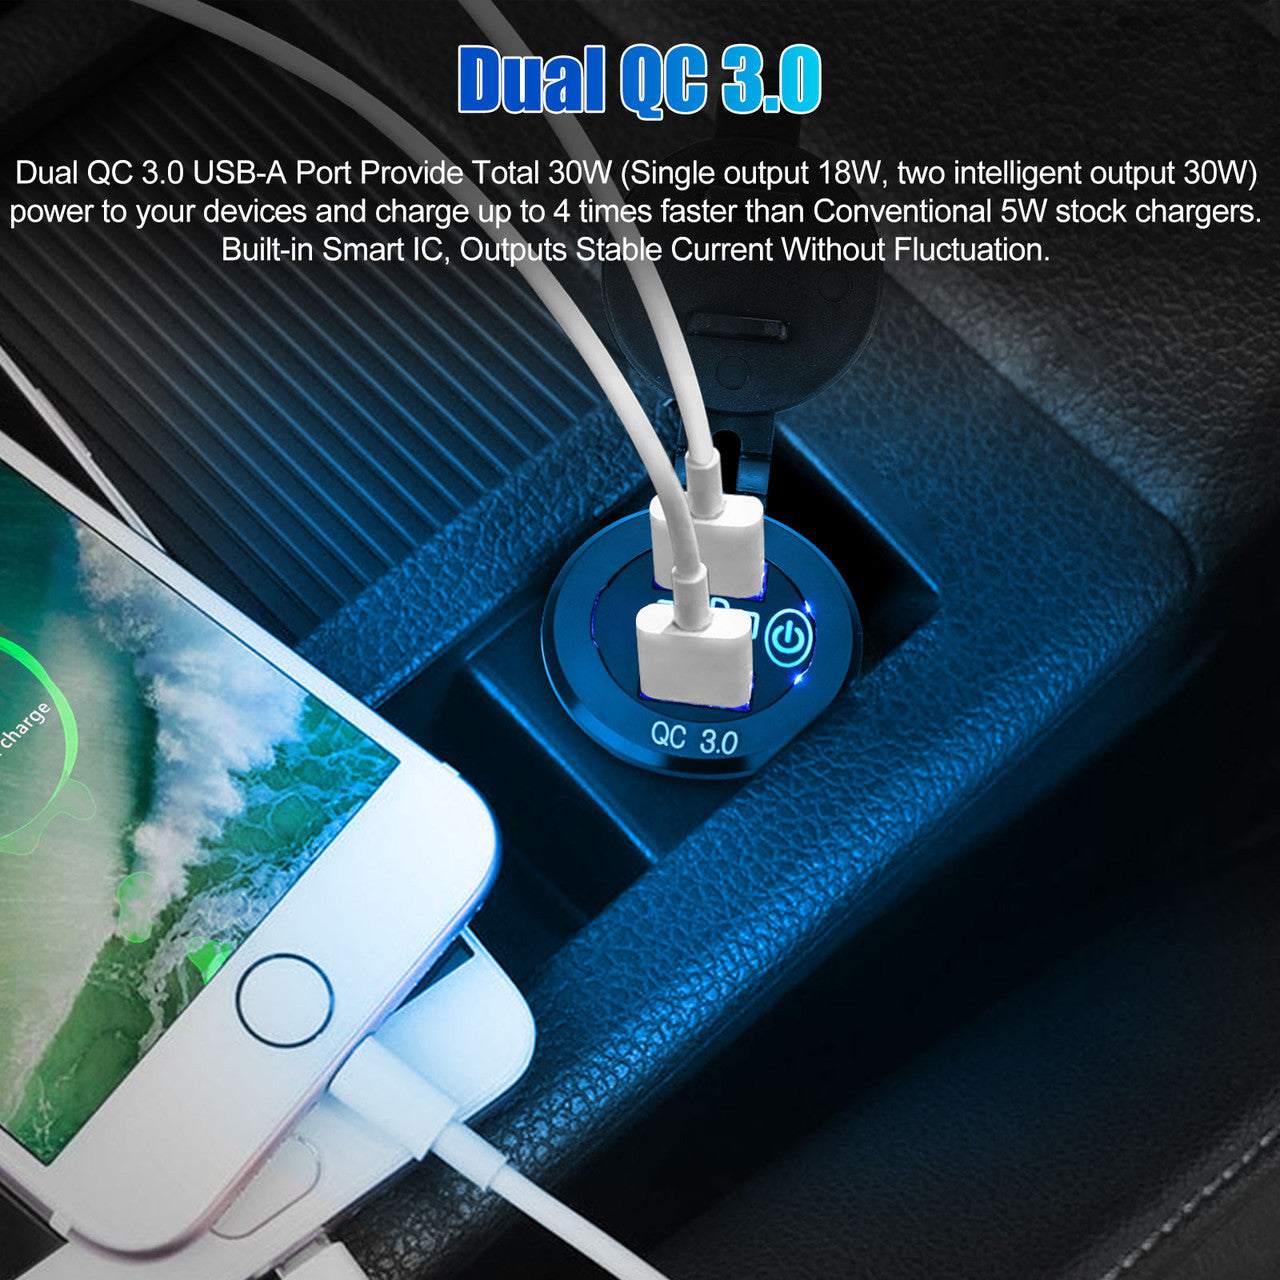 QC3.0 PD Fast Car Charger Socket with Dual USB Ports and a Metal Body